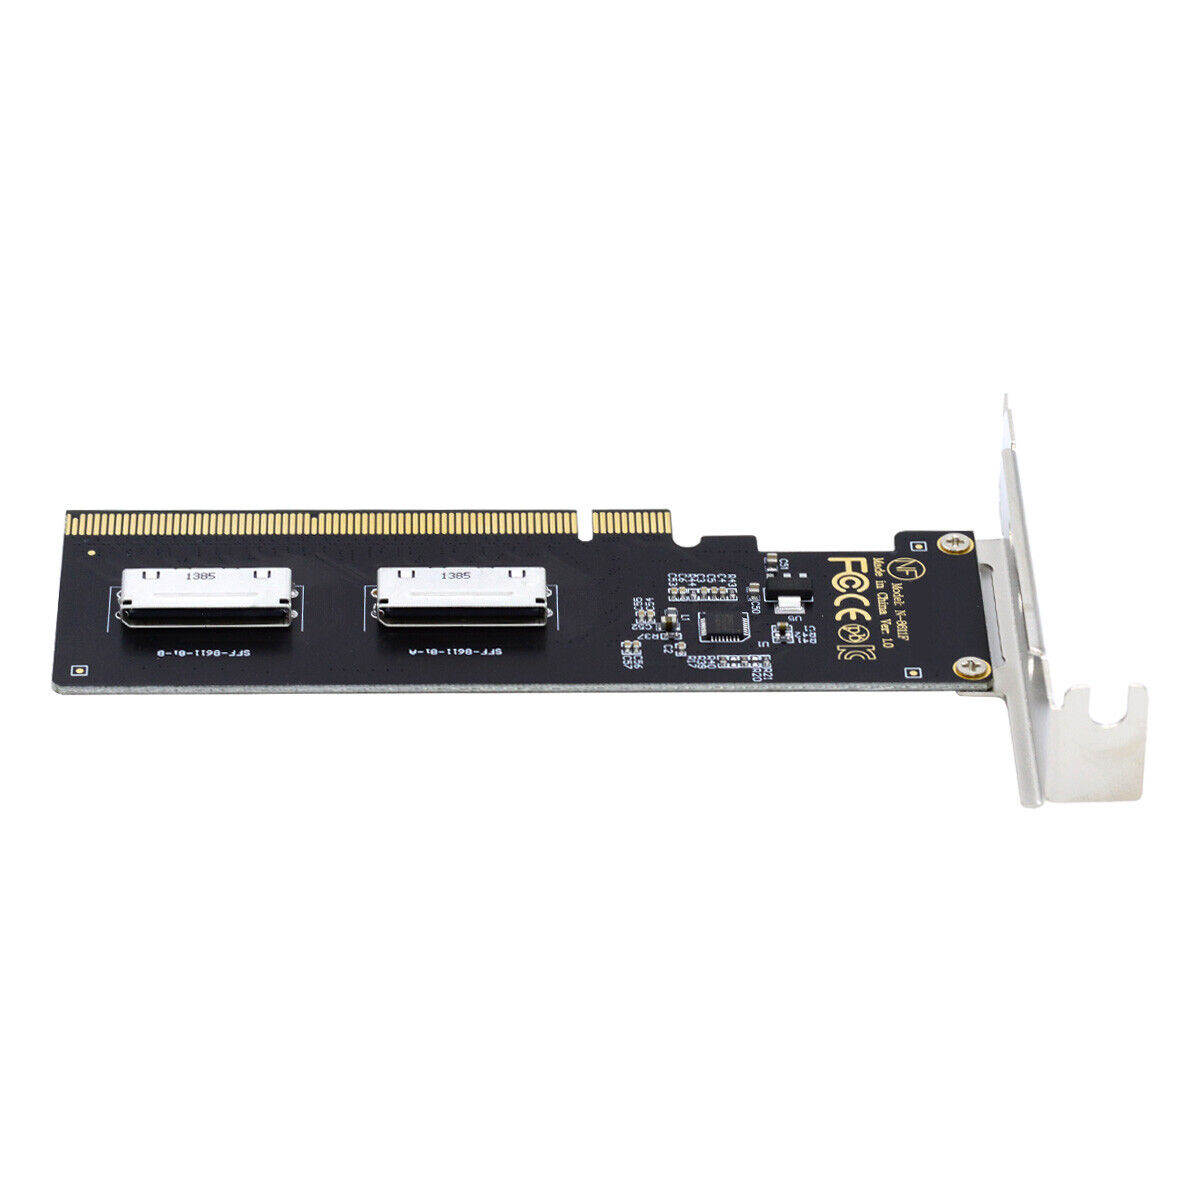 CY PCIE PCI-Express 16x to Dual Oculink SFF-8612 SFF-8611 8x VROC Adapter